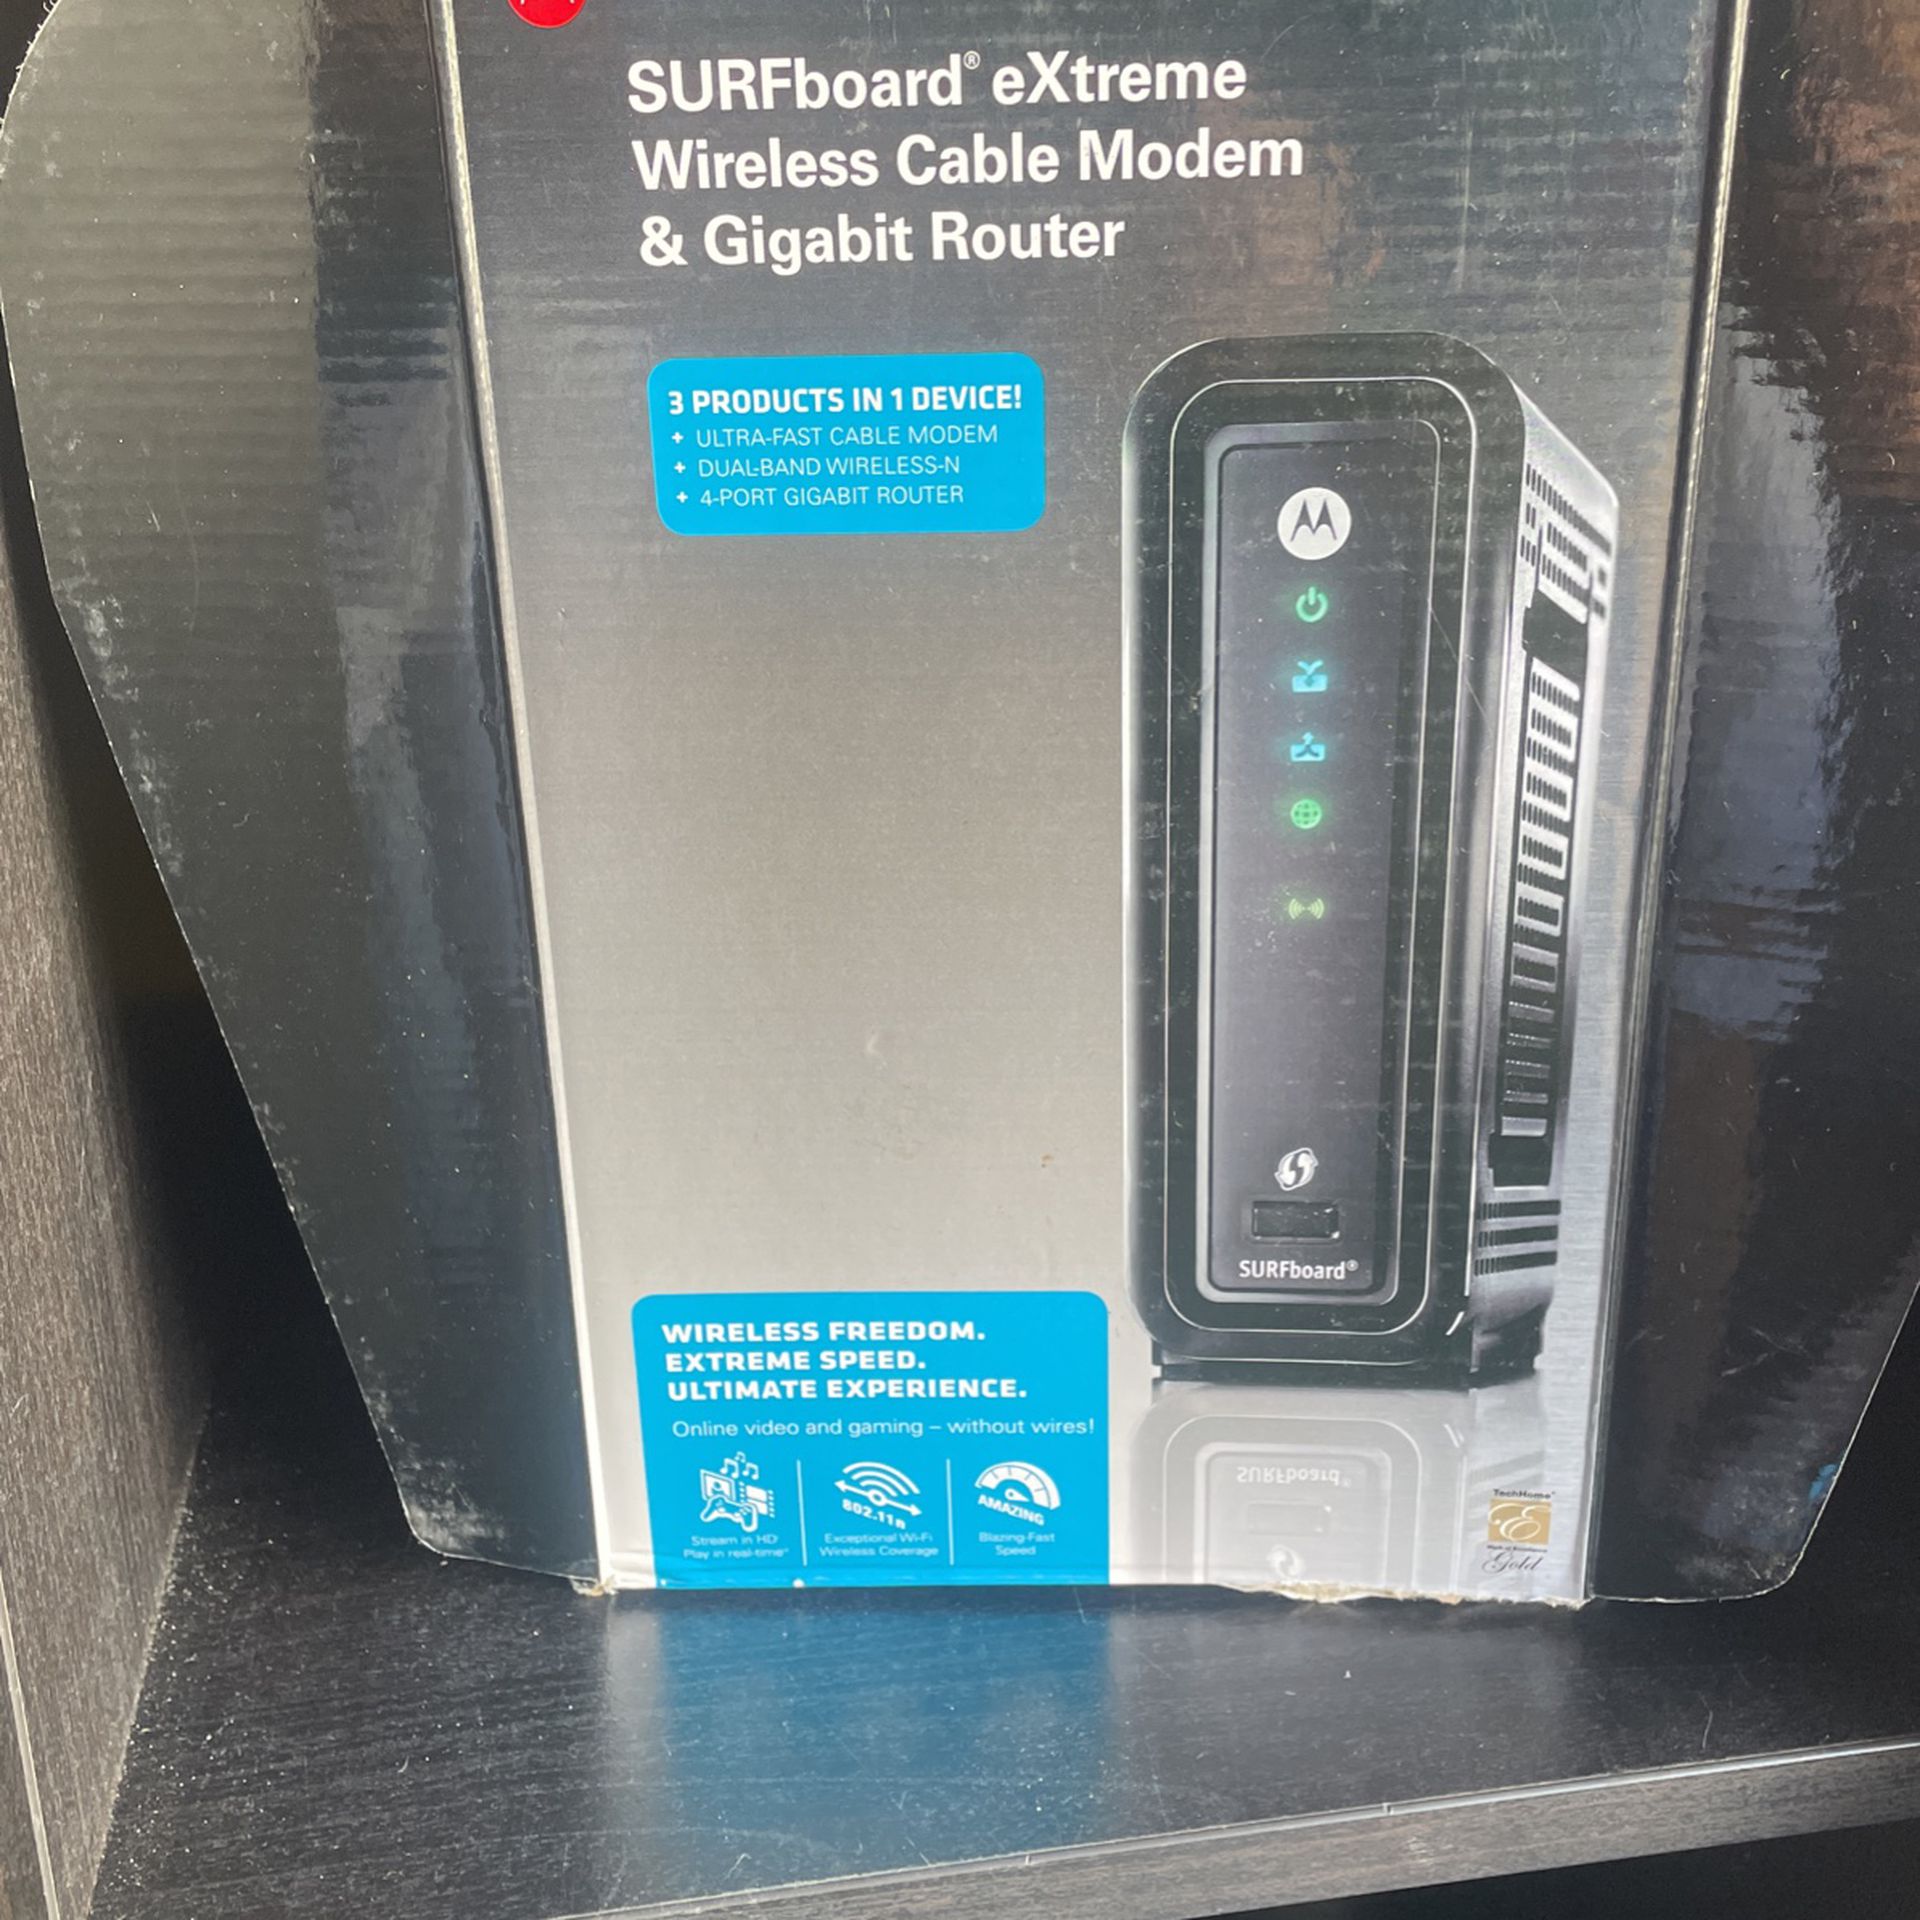 ARRIS SURFboard SBG6580 DOCSIS 3.0 Cable Modem/ Wi-Fi N300 2.4Ghz + N300 5GHz Dual Band Router - Retail Packaging Black (570763-006-00)